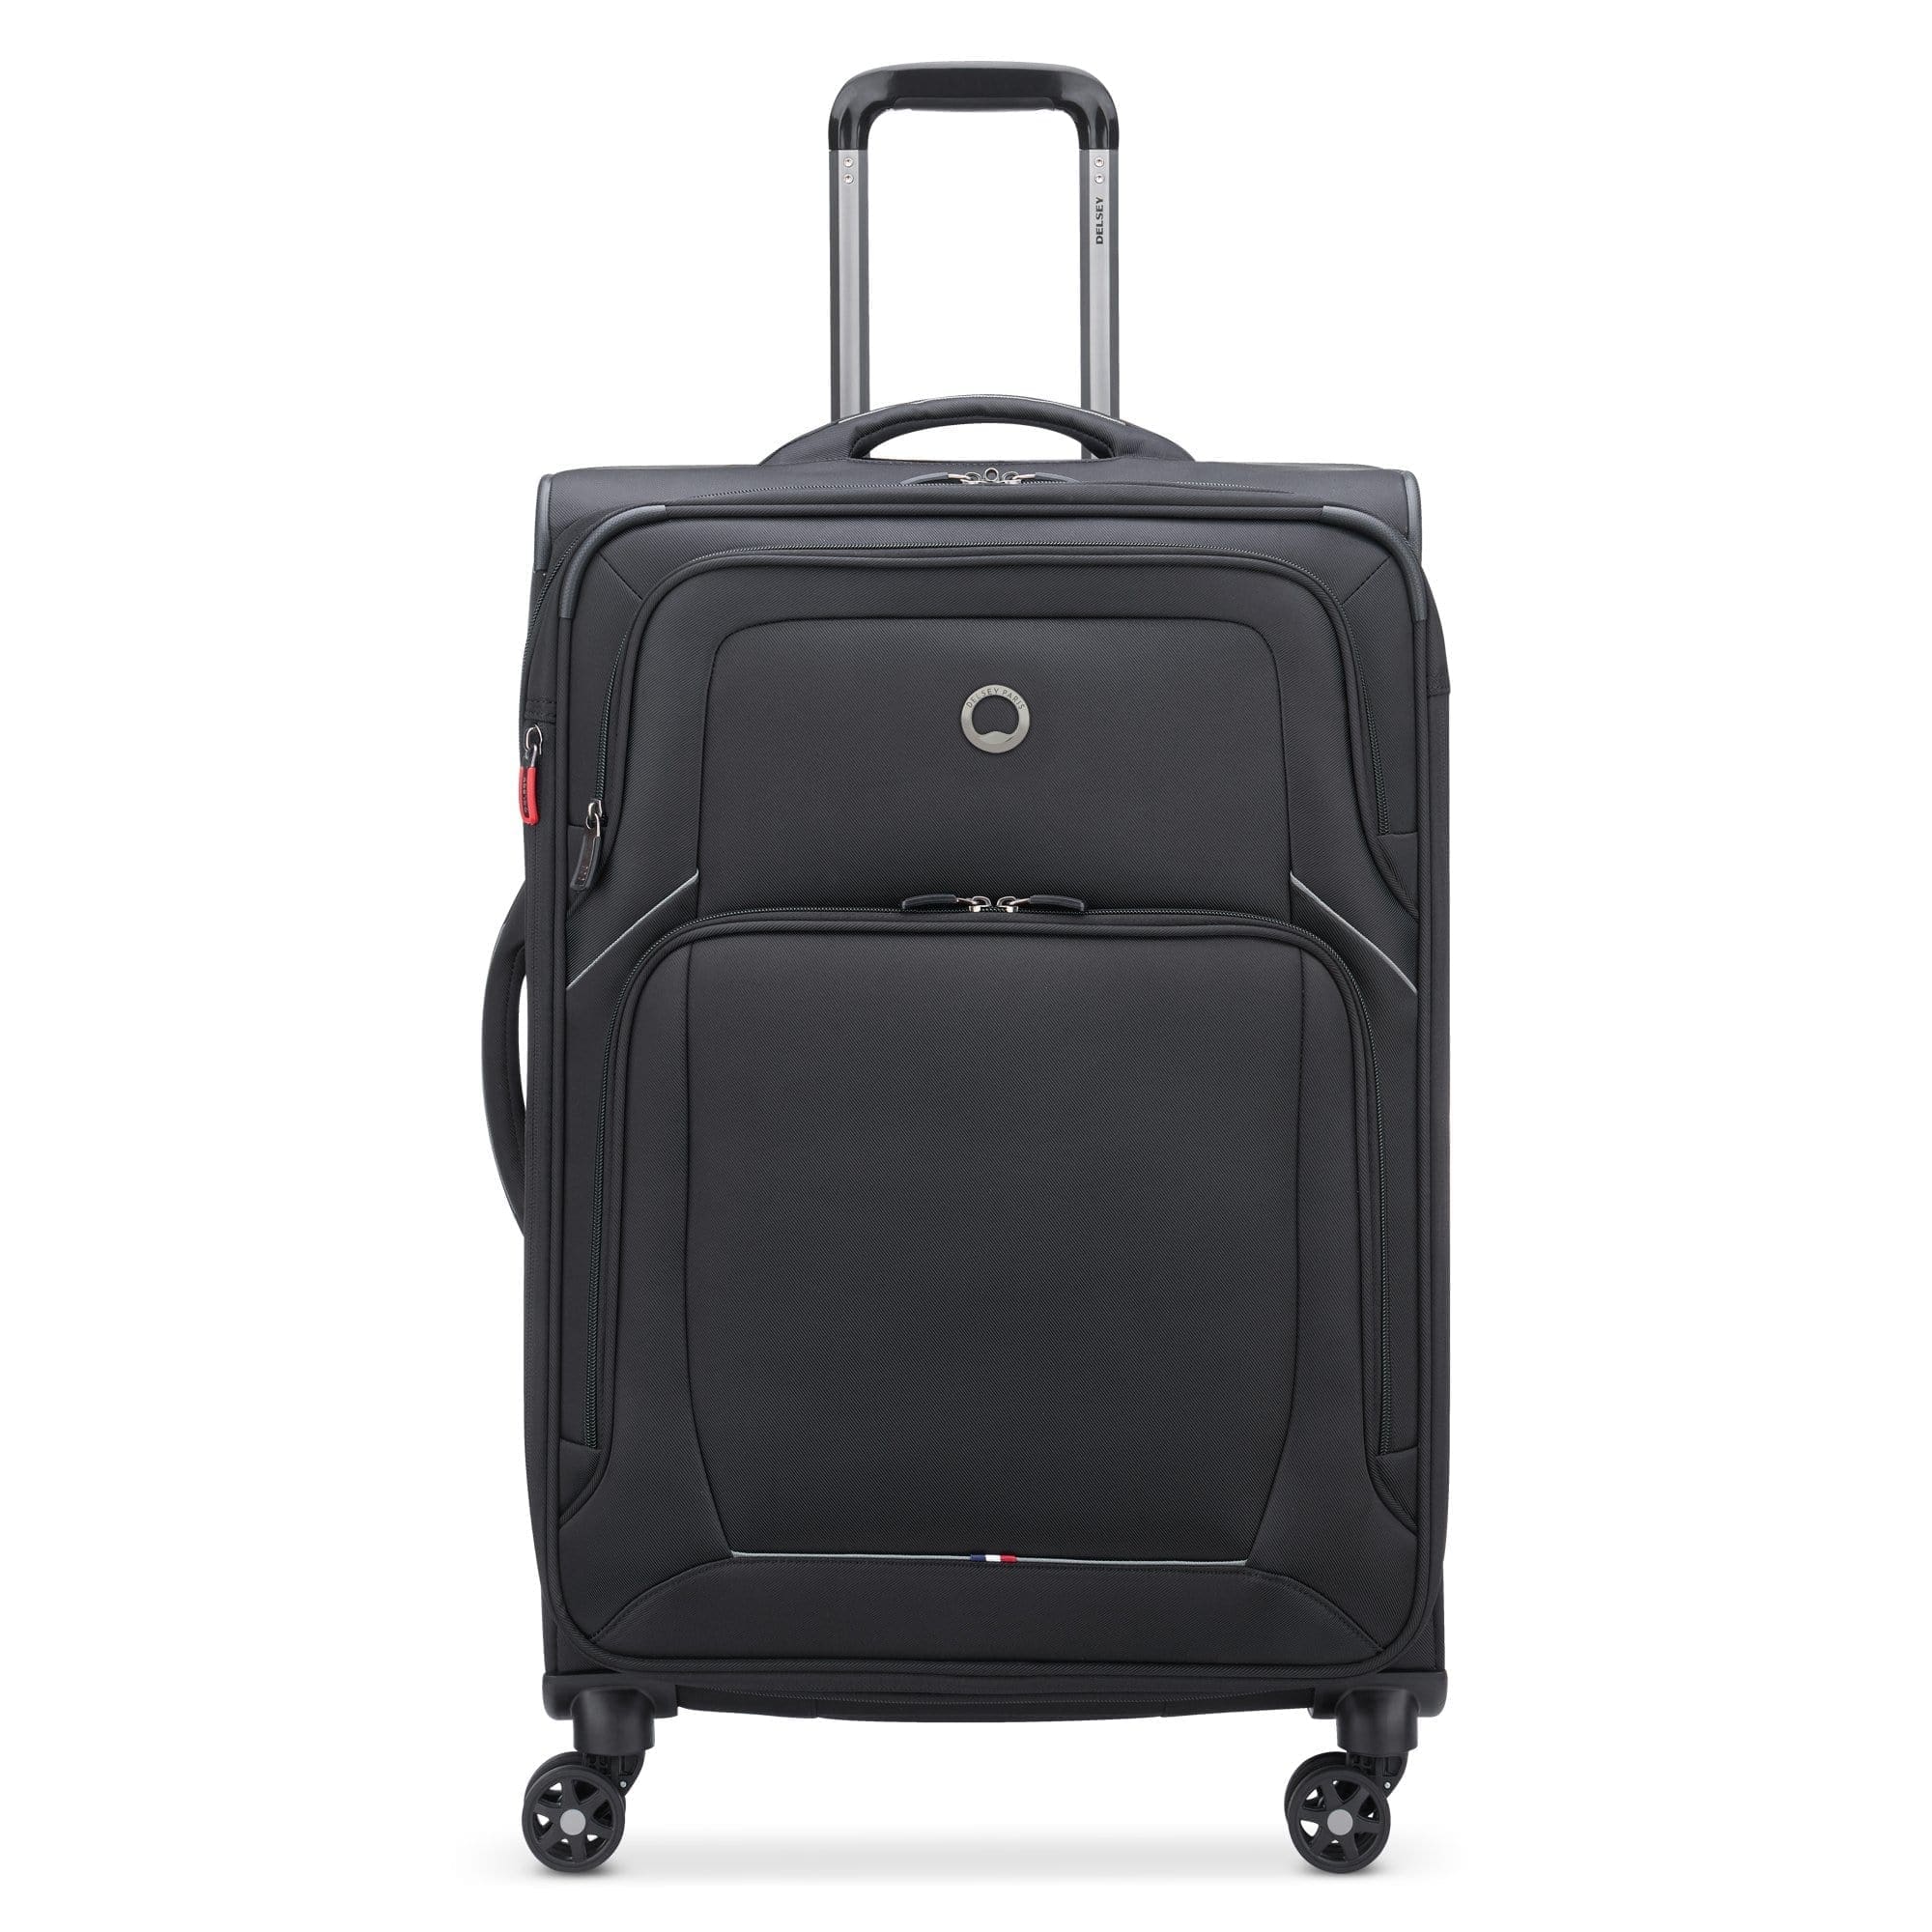 delsey-optimax-lite-70cm-softcase-4-double-wheel-expandable-check-in-luggage-trolley-black-00328582000t9.jpg